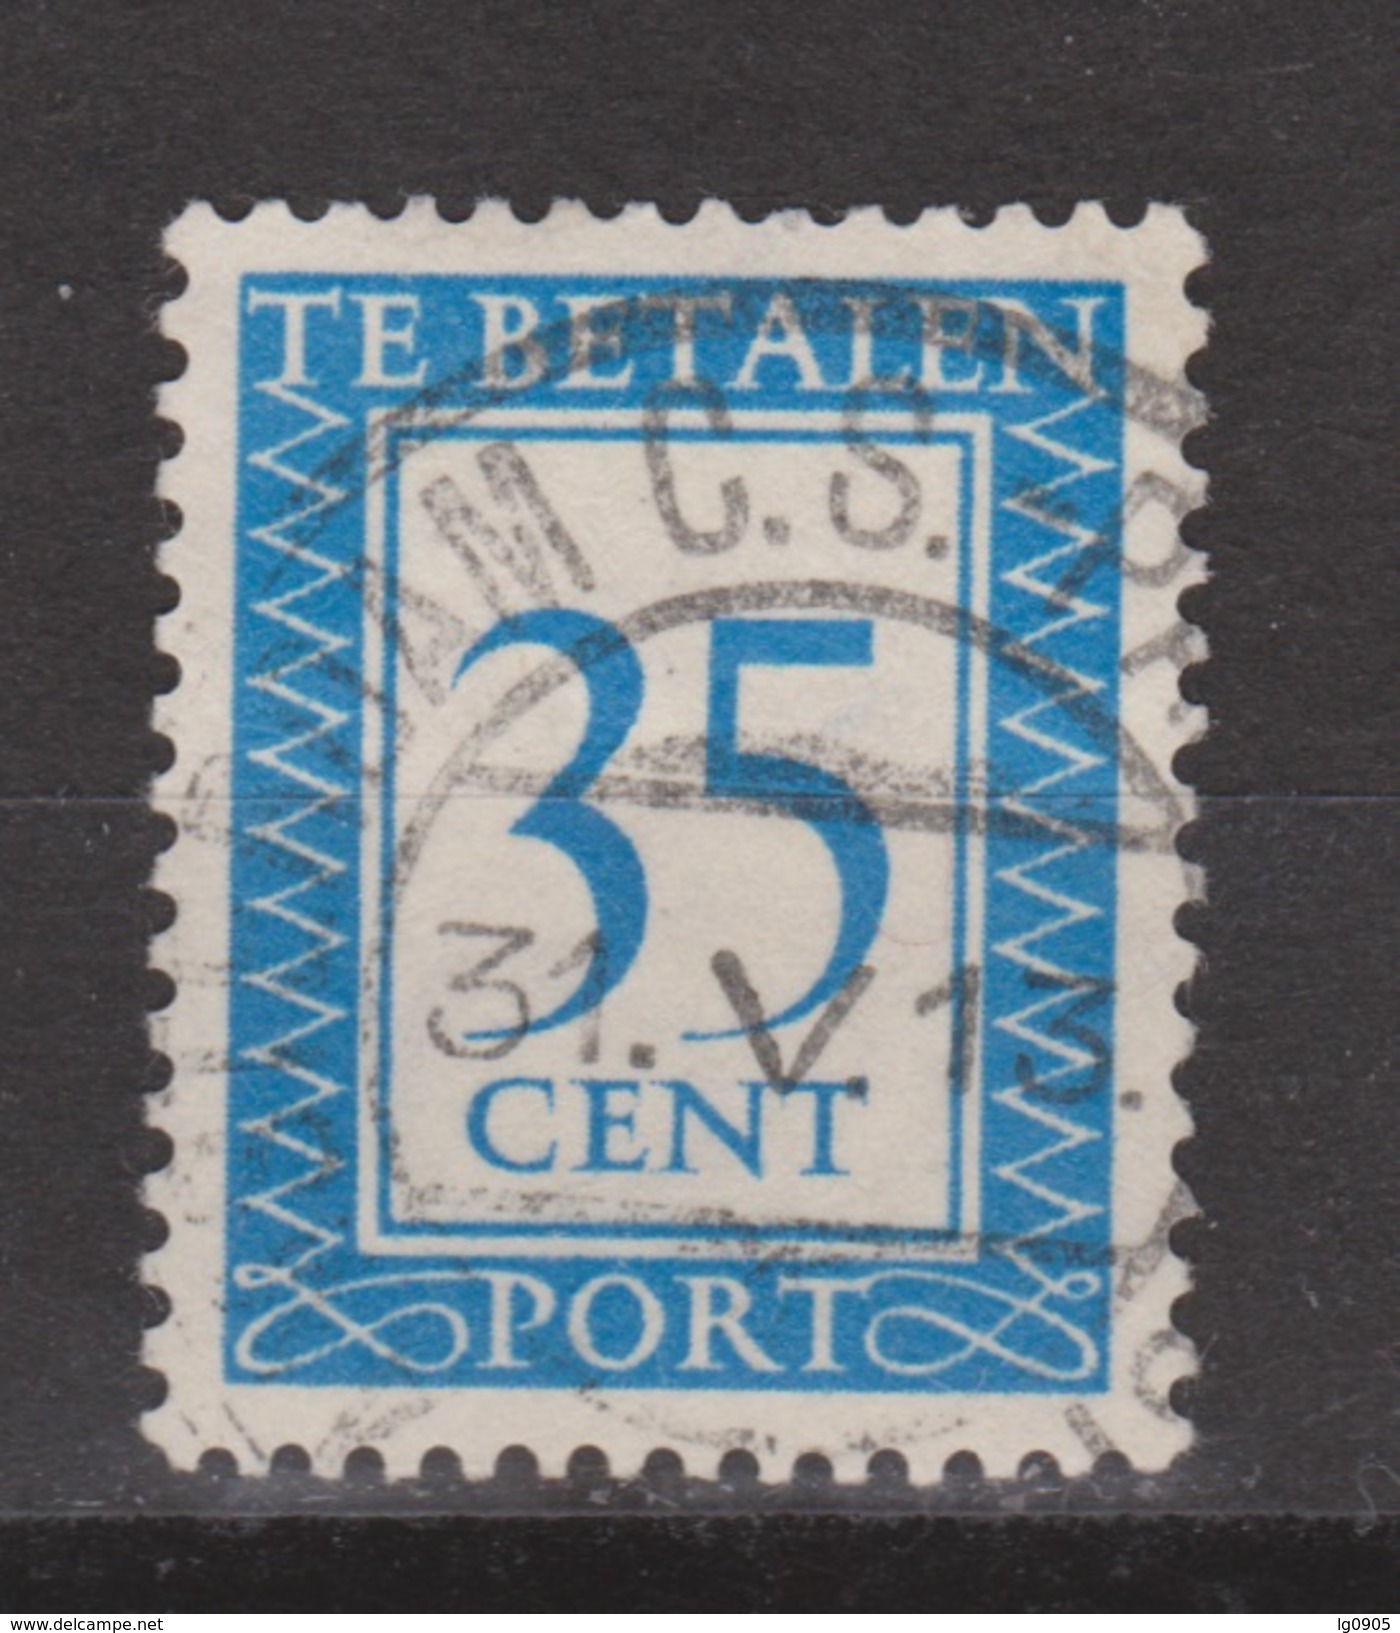 NVPH Nederland Netherlands Holanda Pays Bas Port 98 Used Timbre-taxe Postmarke Sellos De Correos NOW MANY DUE STAMPS - Postage Due